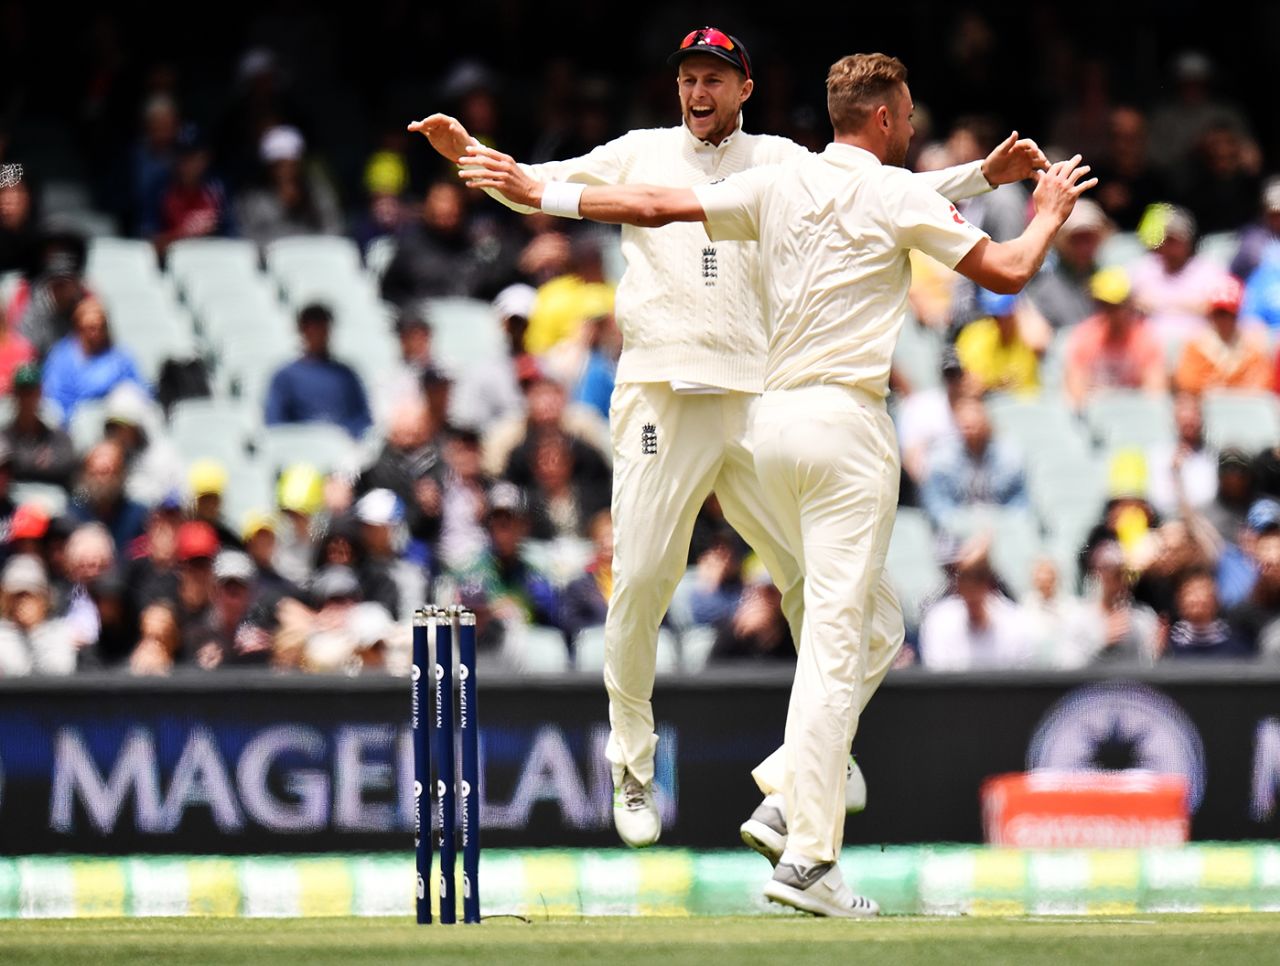 Joe Root and Stuart Broad celebrate a wicket, Australia v England, 2nd Test, The Ashes 2017-18, 2nd day, Adelaide, December 3, 2017